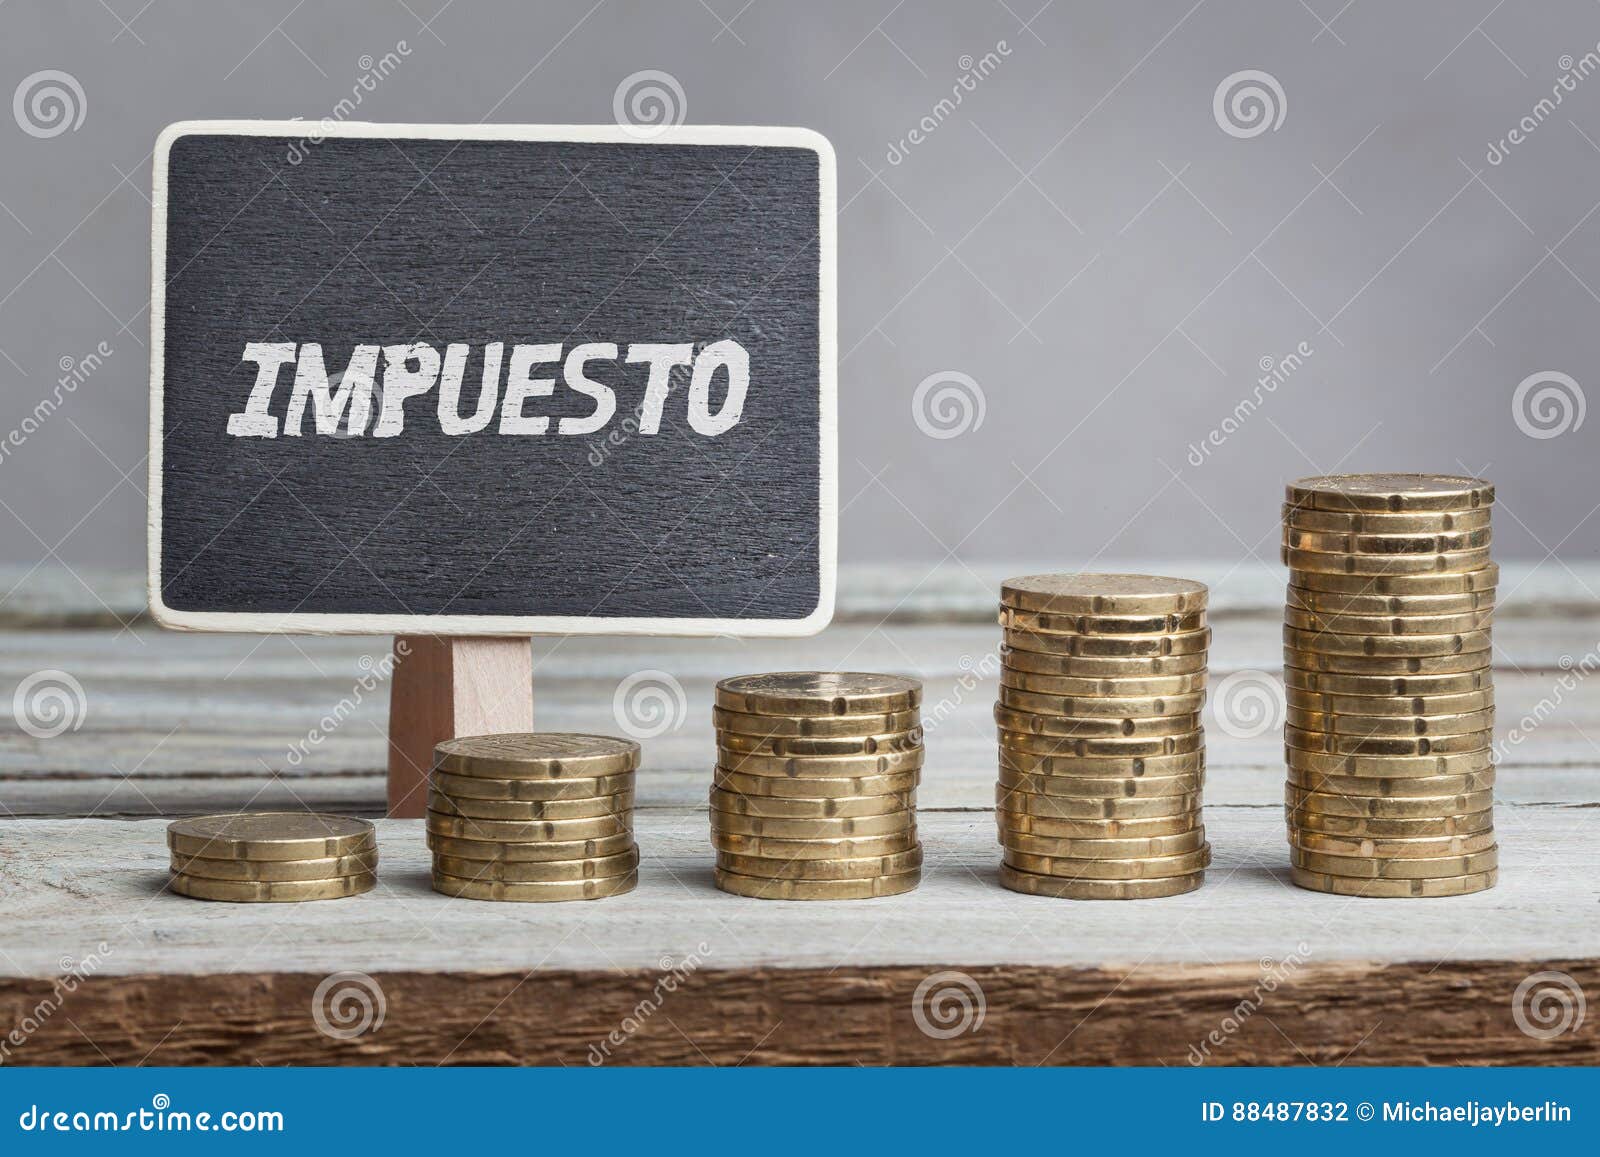 impuesto, spanish text for tax on board, growing stacks of money